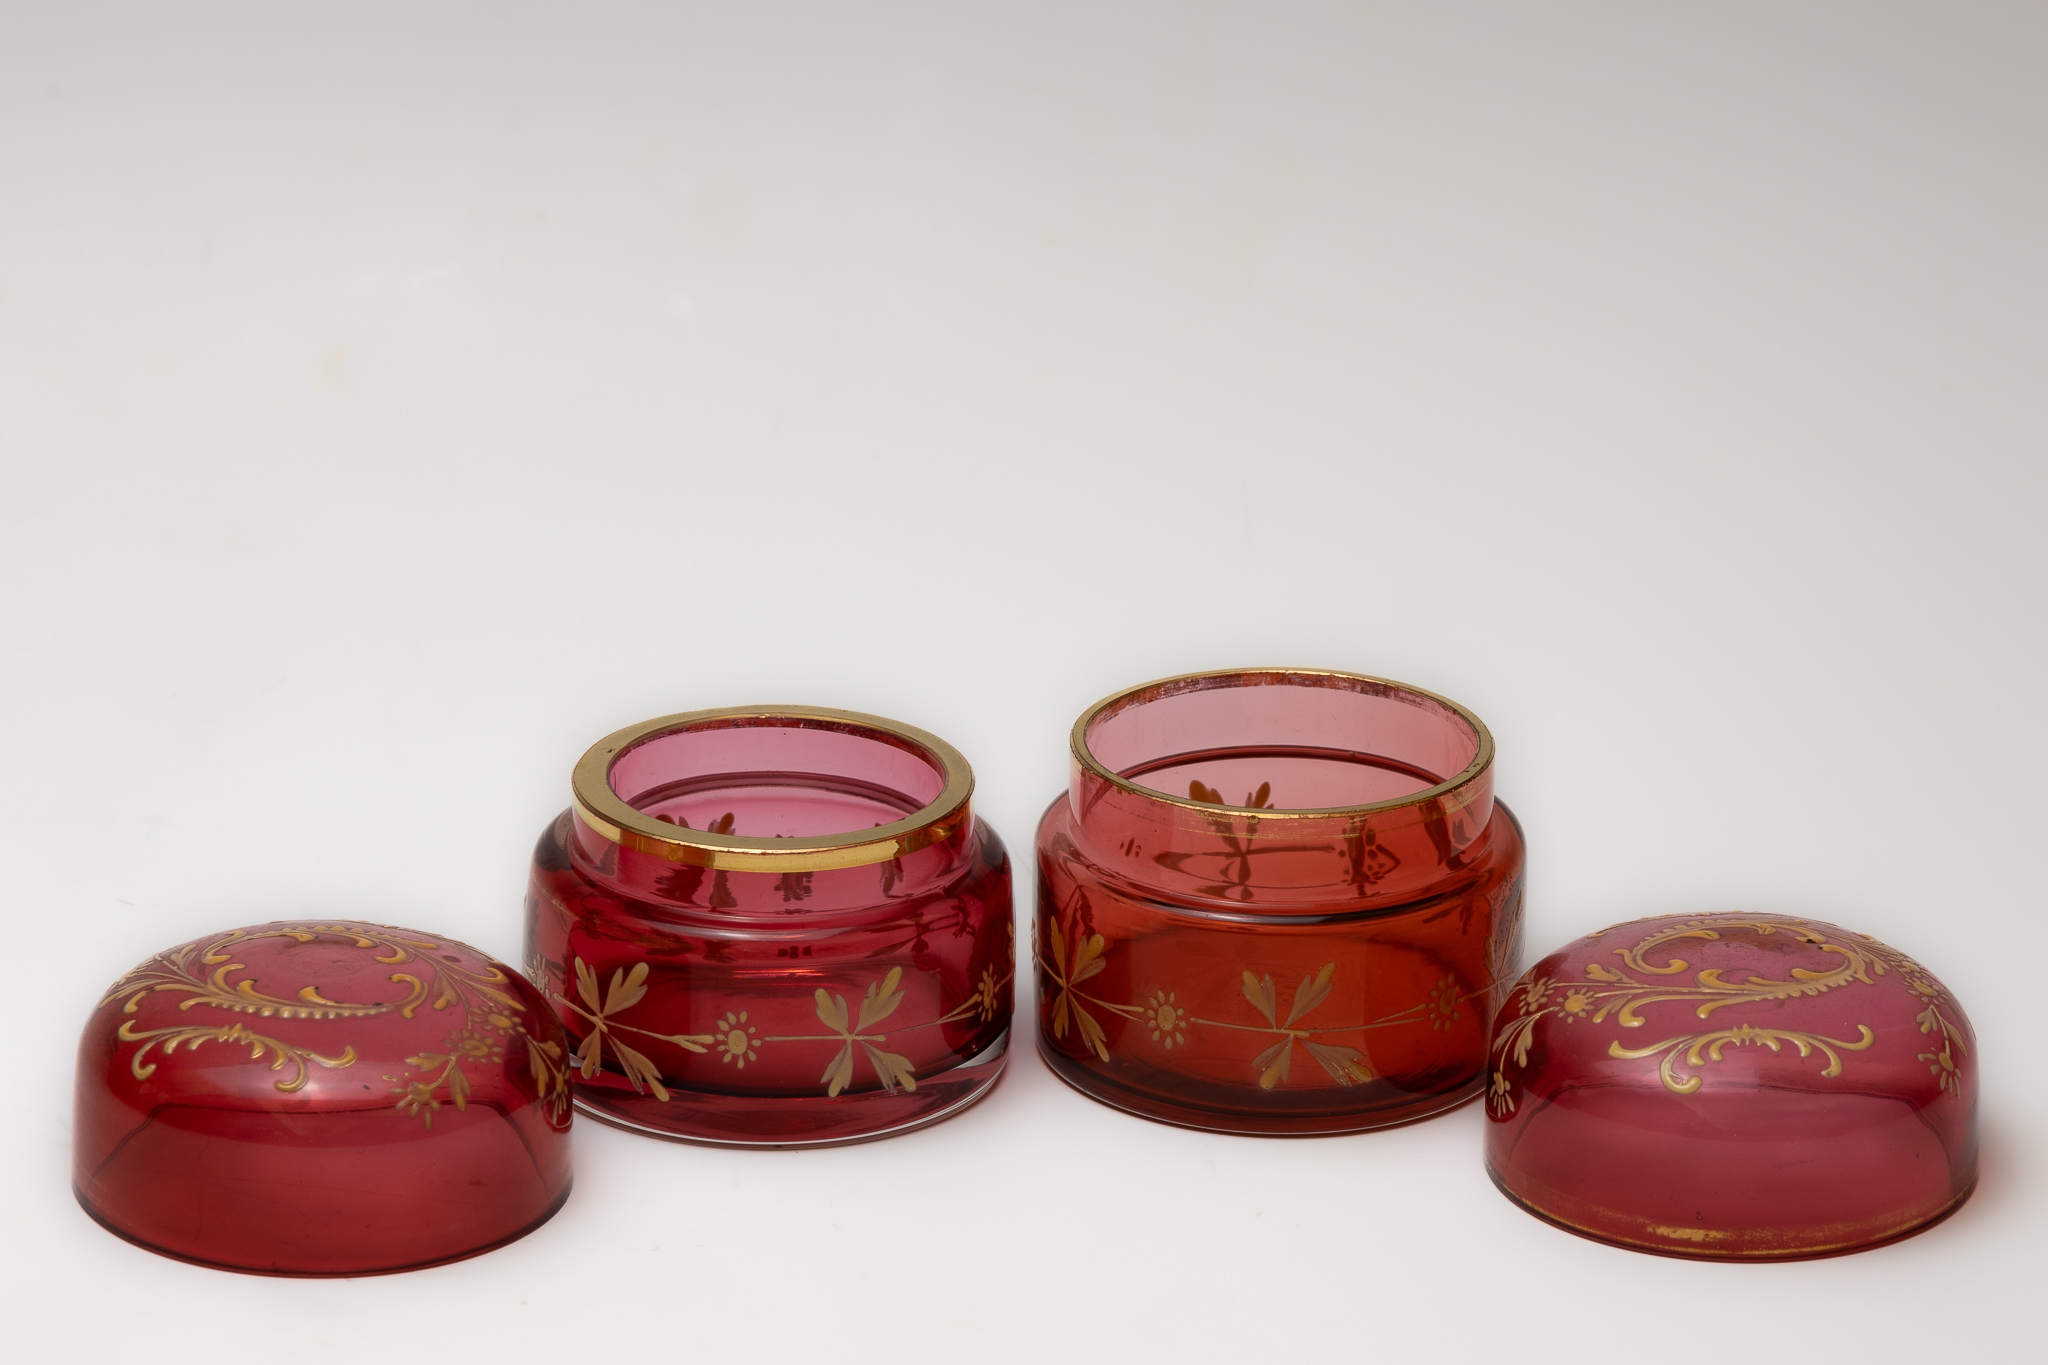 A Pair of Antique Bohemian Red Glass Powder Pots from the 19th Century.

Approximately 7 x 7cm  - Image 2 of 2